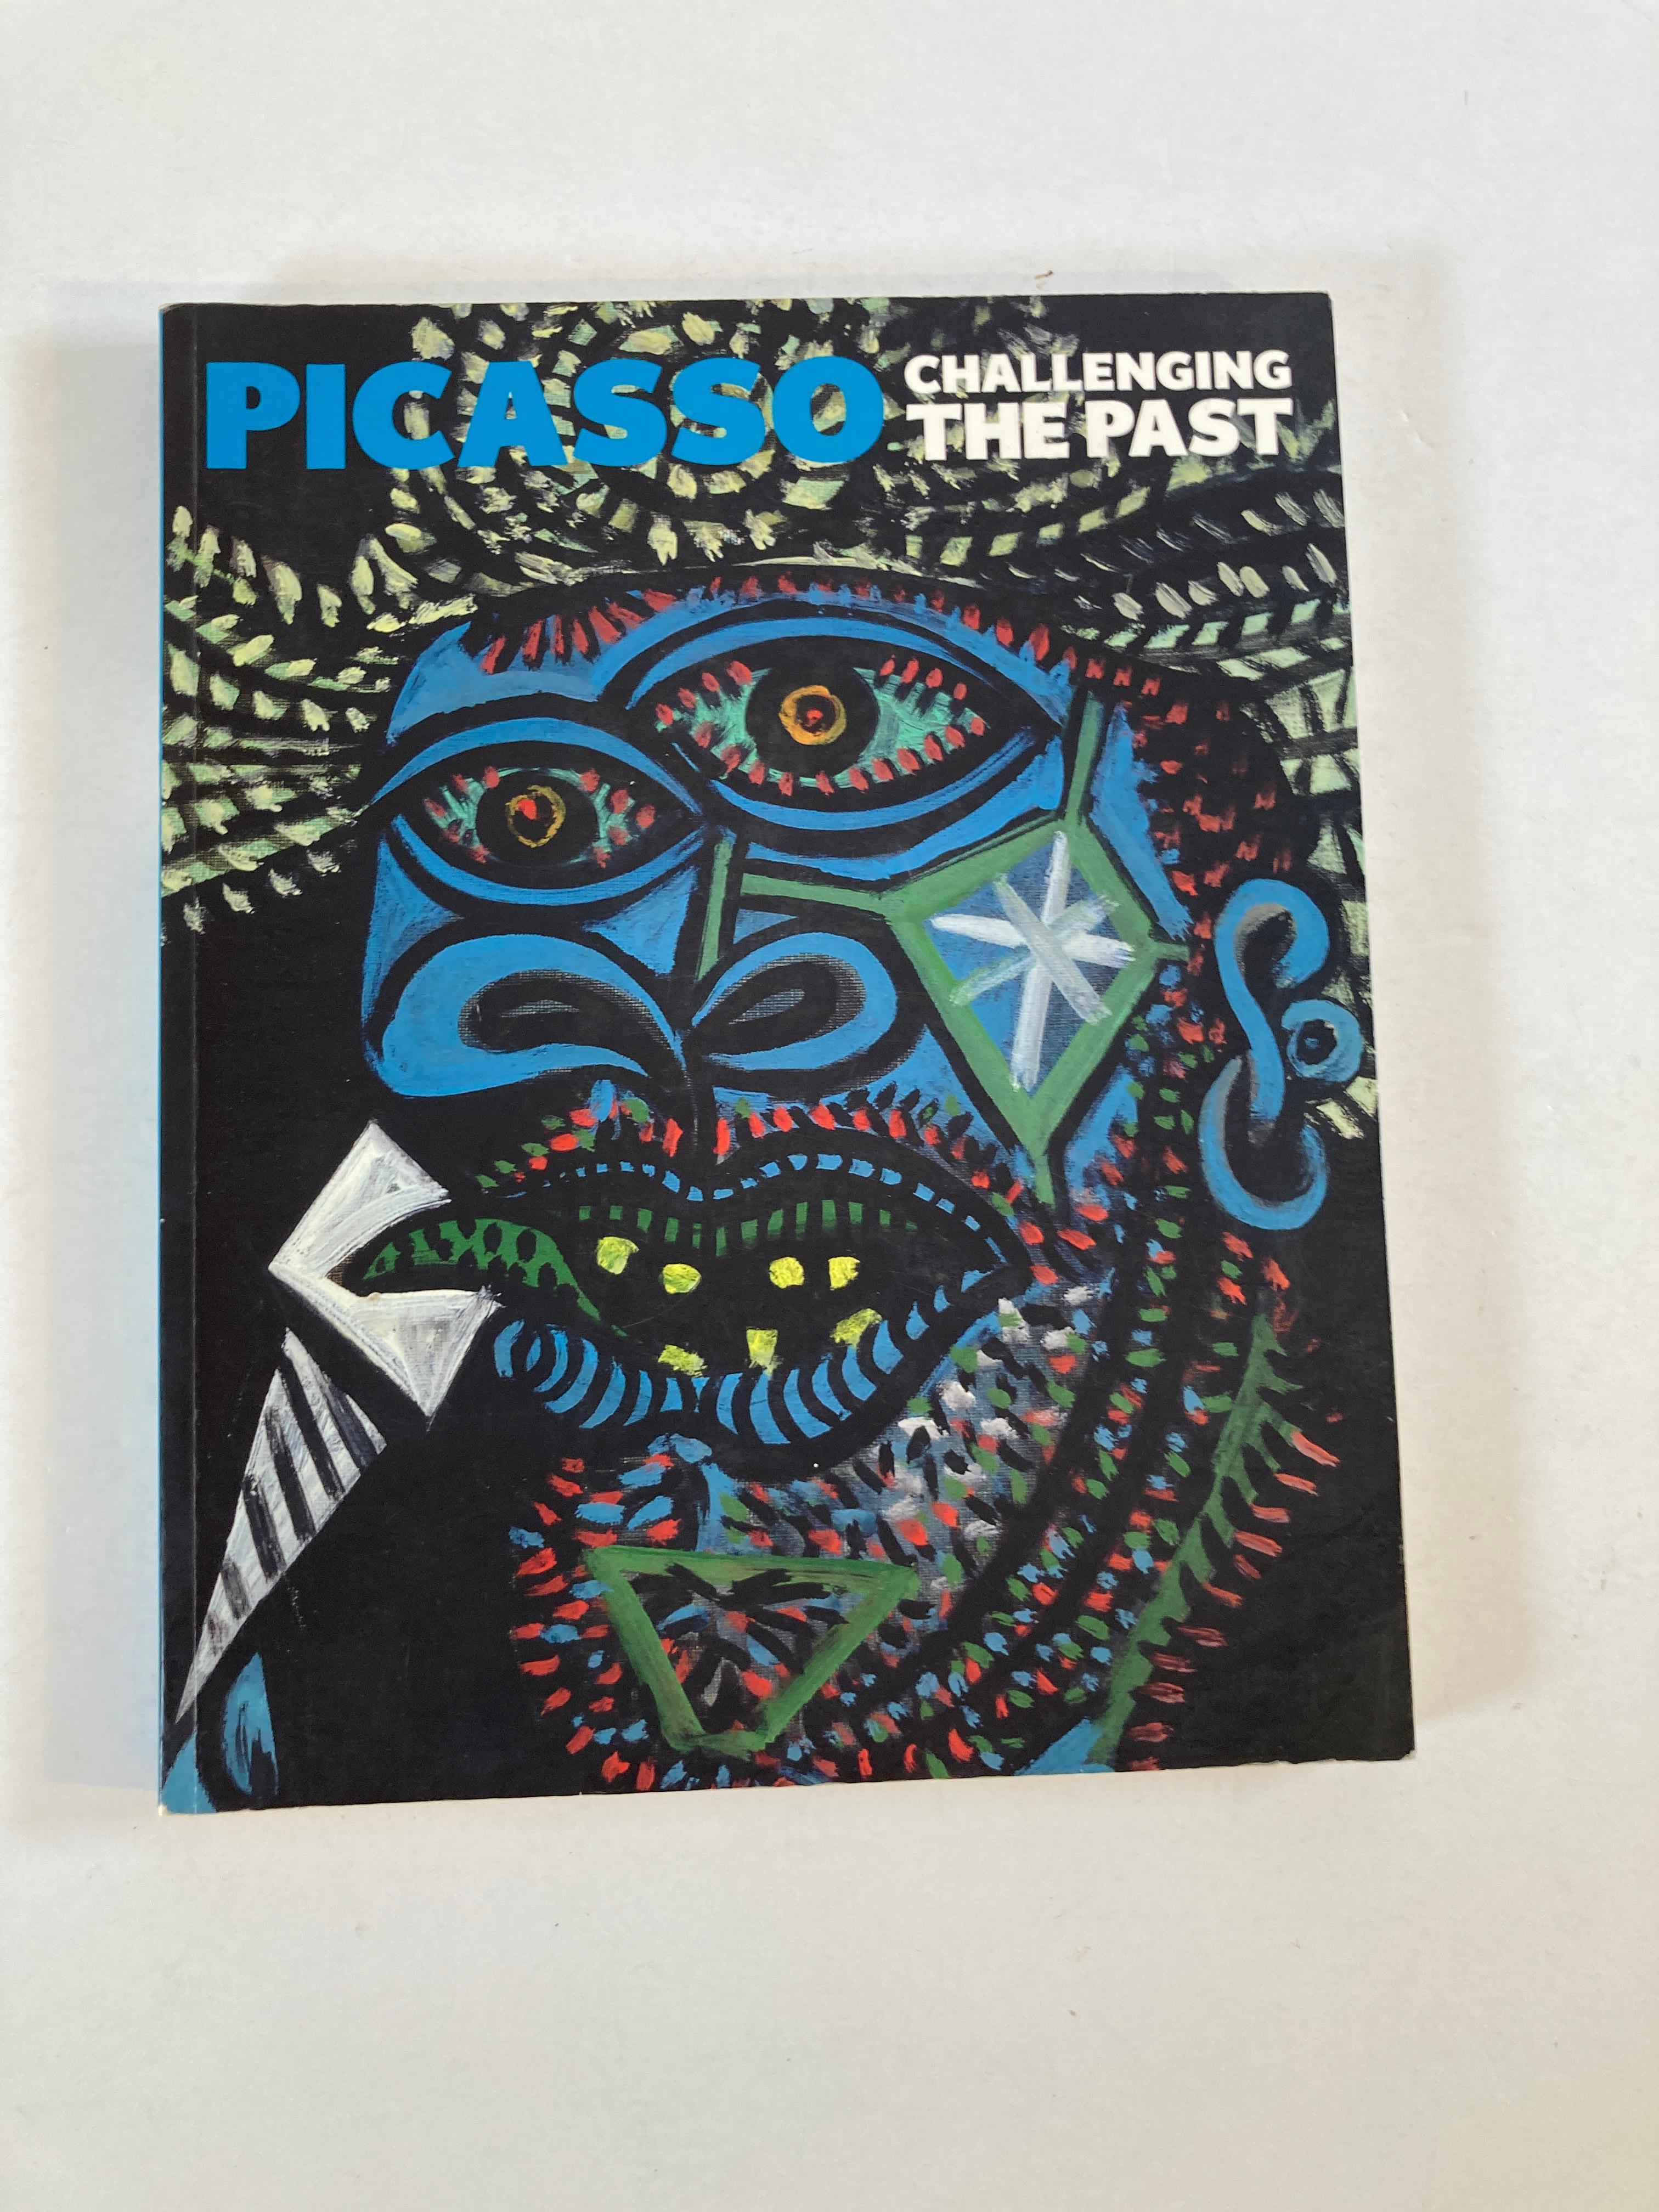 Picasso: Challenging the Past Book by Elizabeth Cowling and Pablo Picasso.
Picasso: Challenging the Past Paperback – May 3, 2011
From his earliest years Pablo Picasso was a passionate student of the European painting tradition. He was naturally